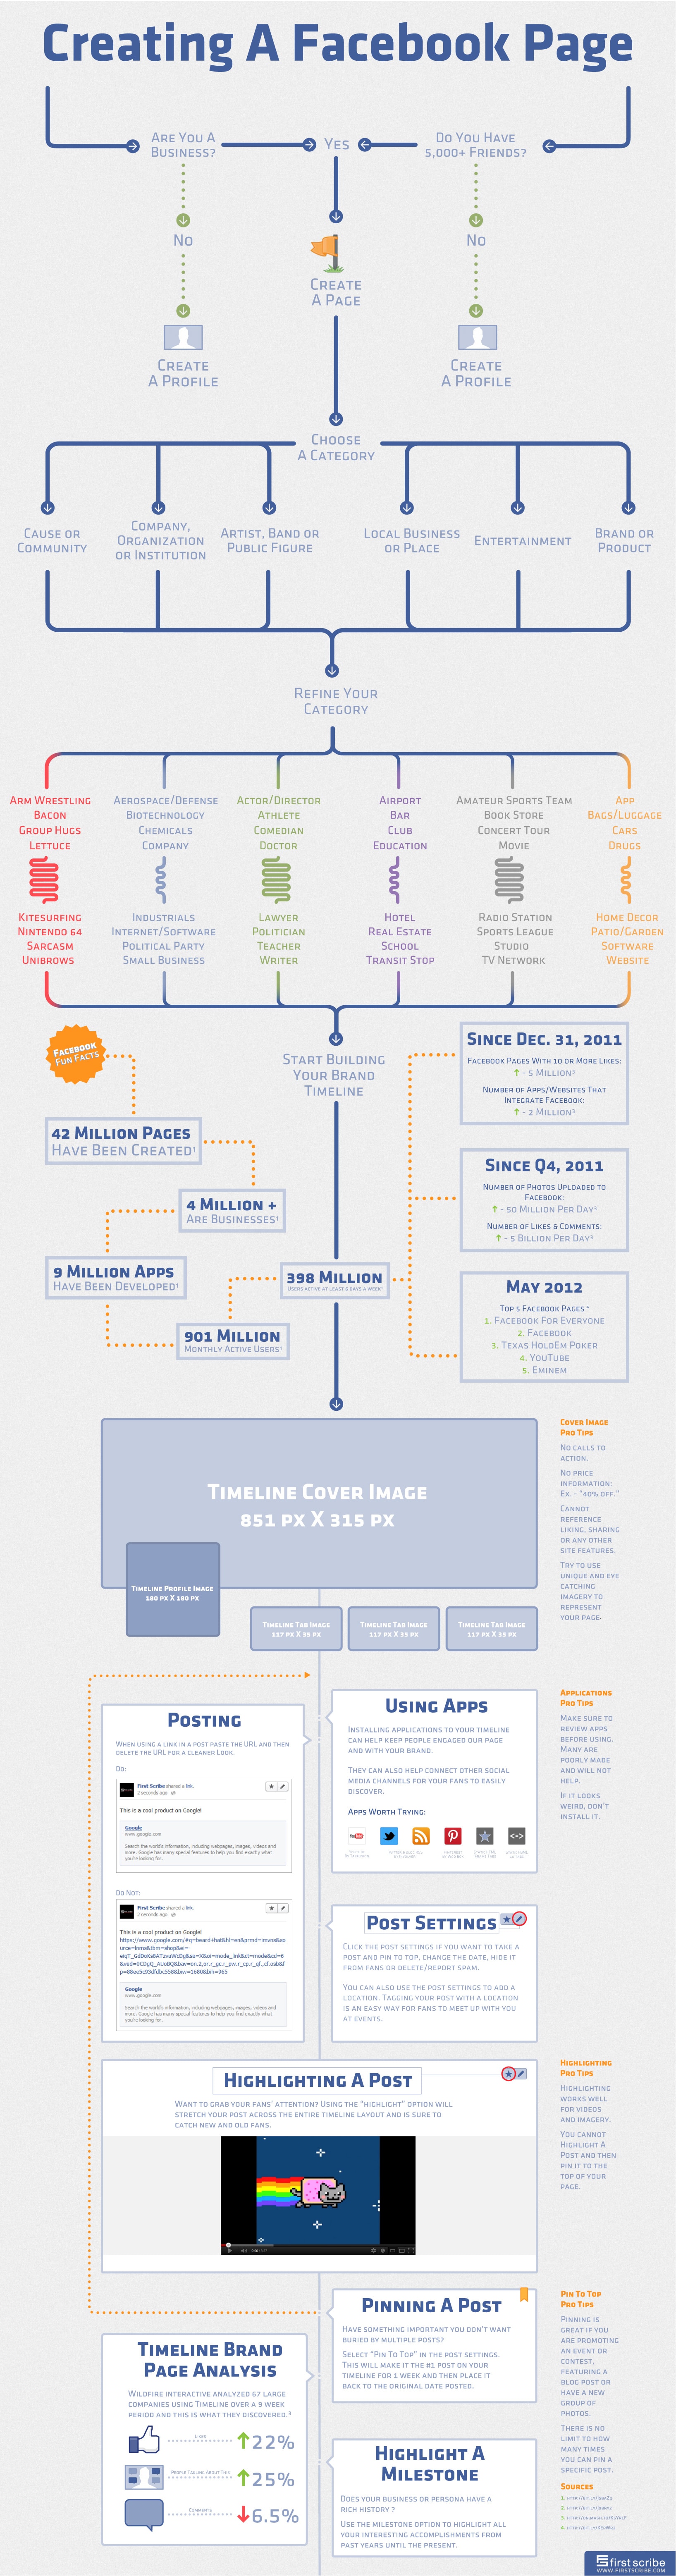 create-a-facebook-page-infographic